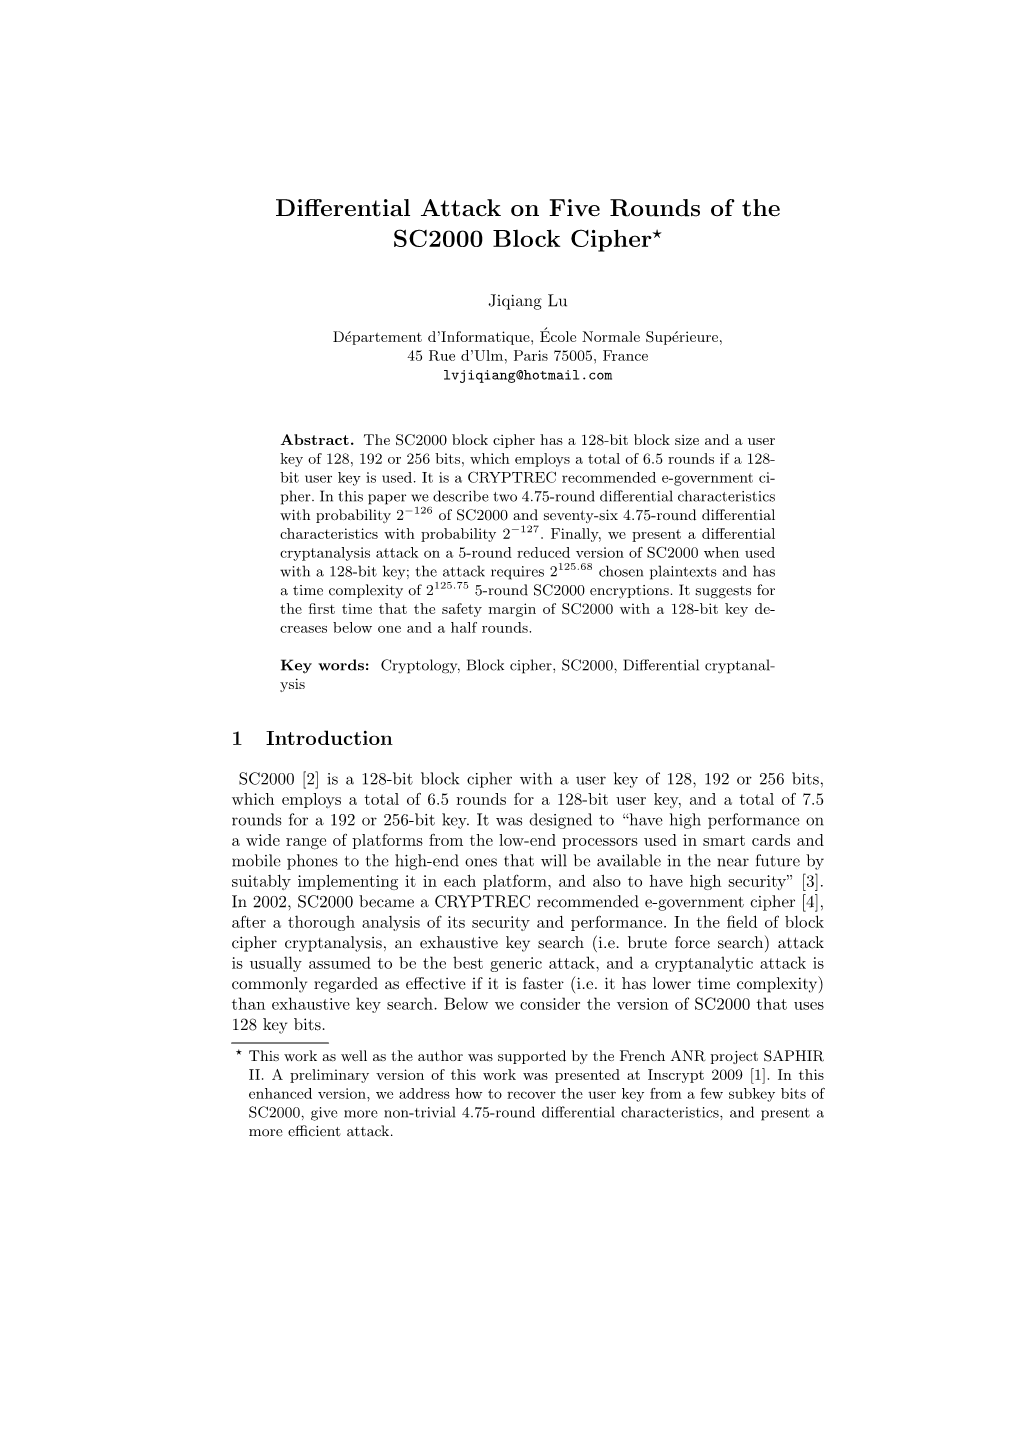 Differential Attack on Five Rounds of the SC2000 Block Cipher⋆